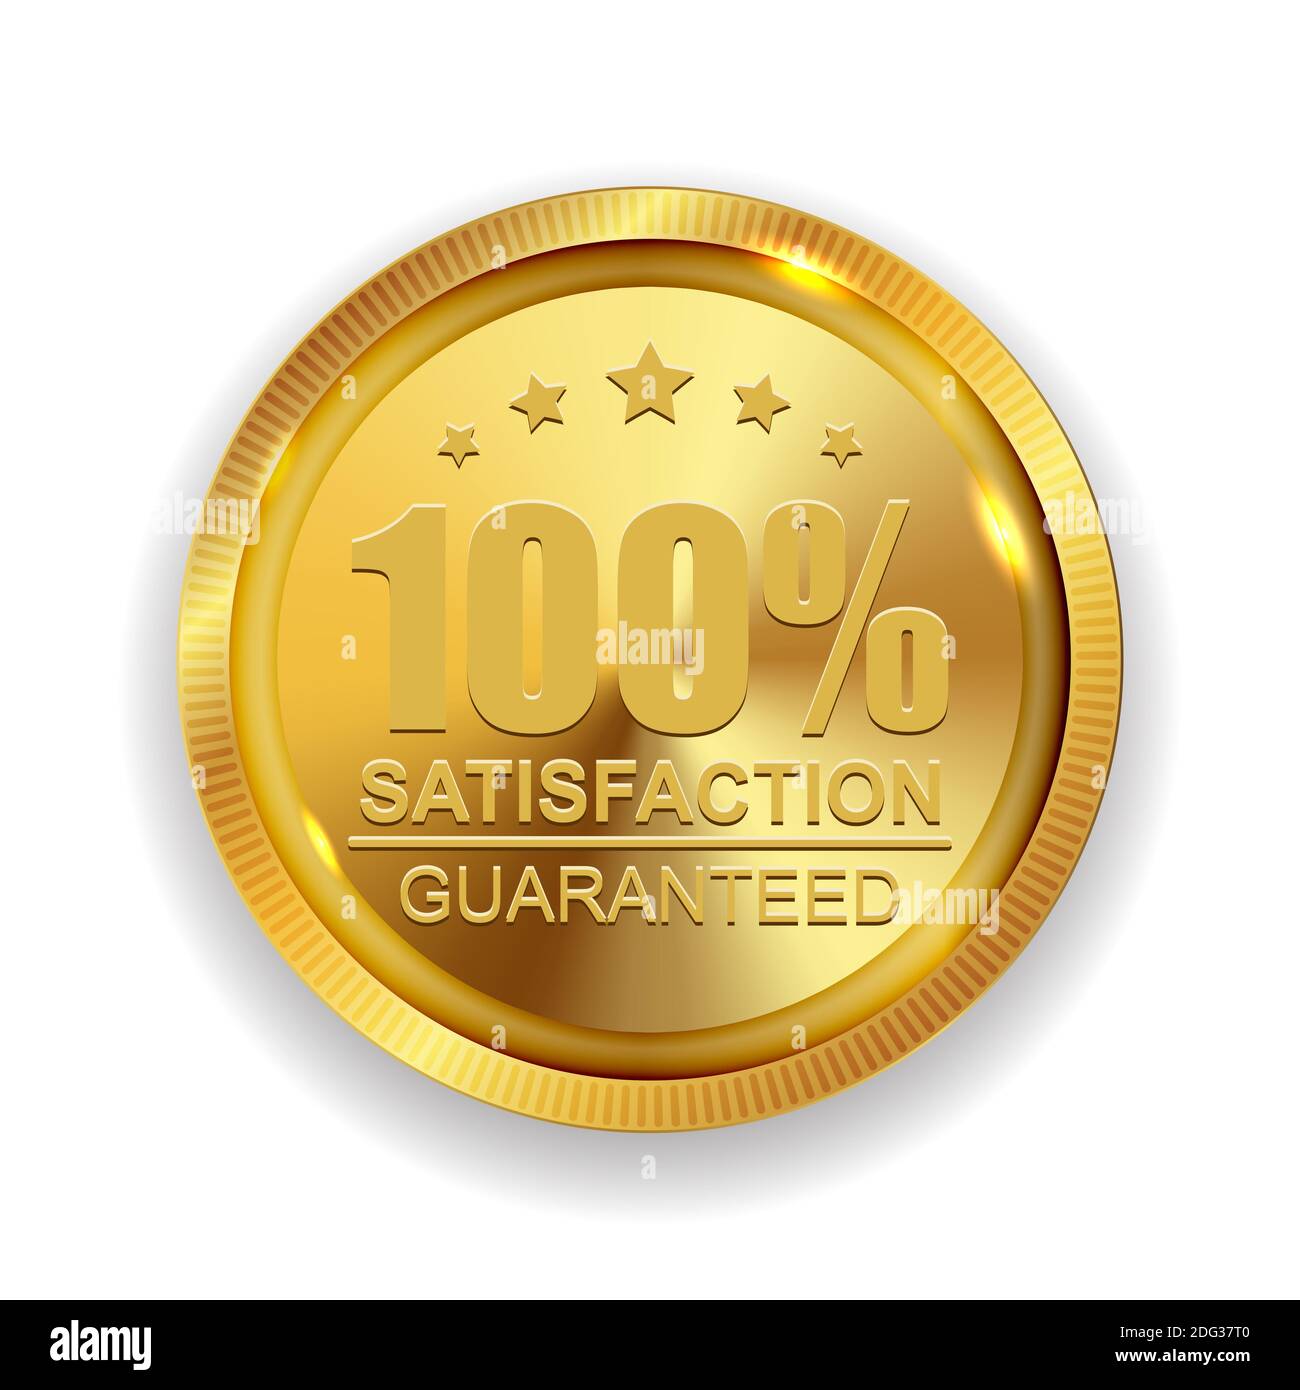 100 Satisfaction Guaranteed Golden Medal Label Icon Seal Sign Isolated on White Background. Illustration Stock Photo